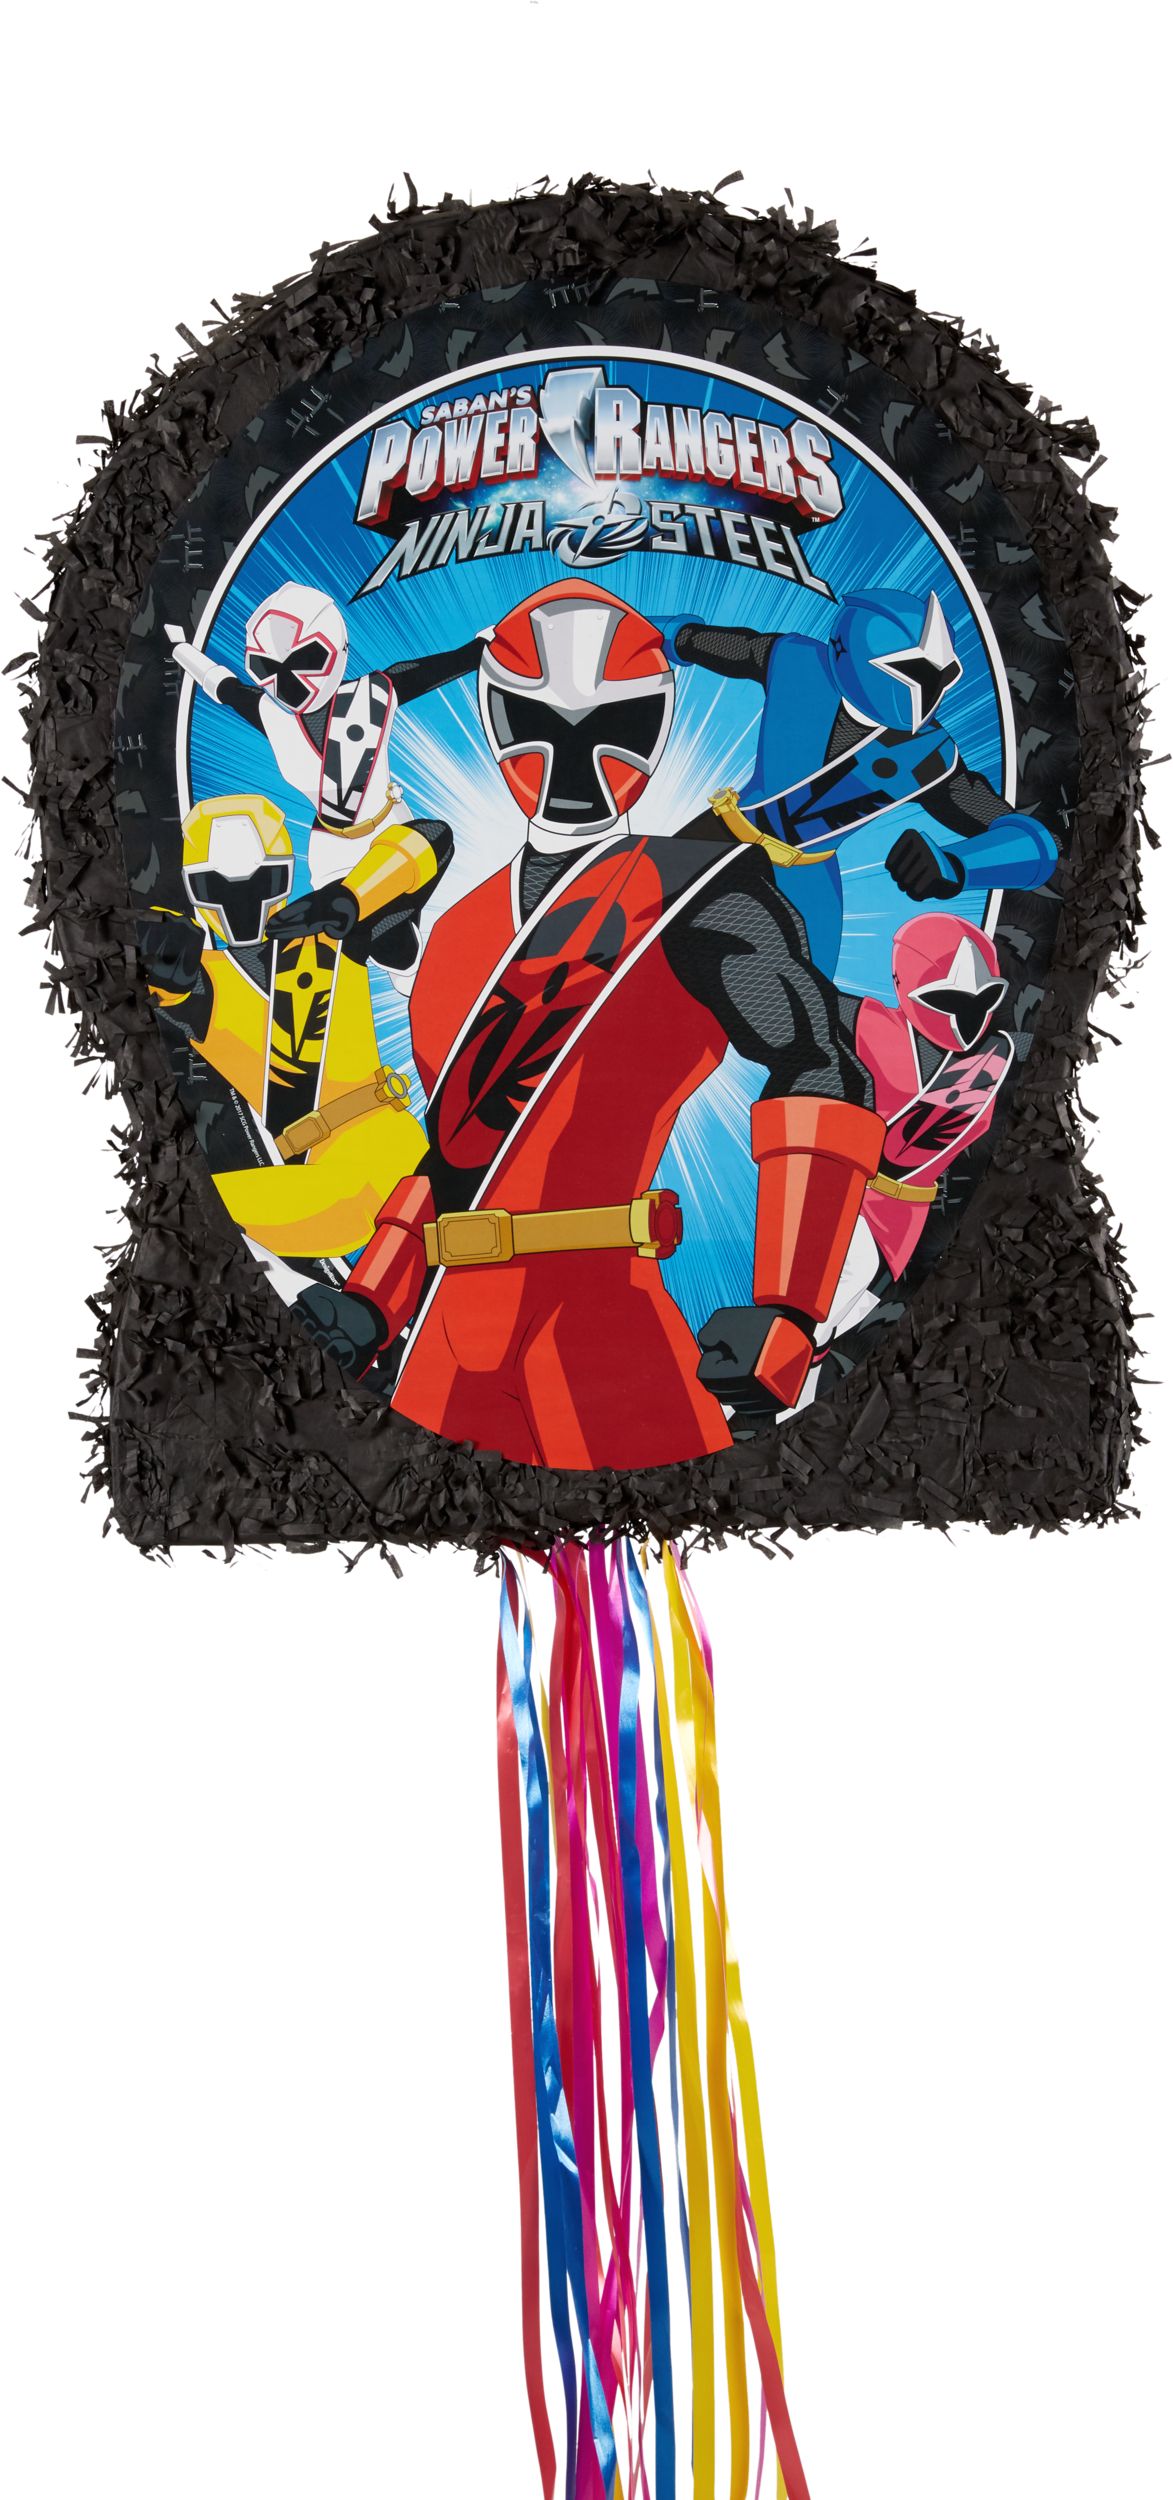 Marvel Avengers Pull-String Piñata - 1 Each - Party Direct